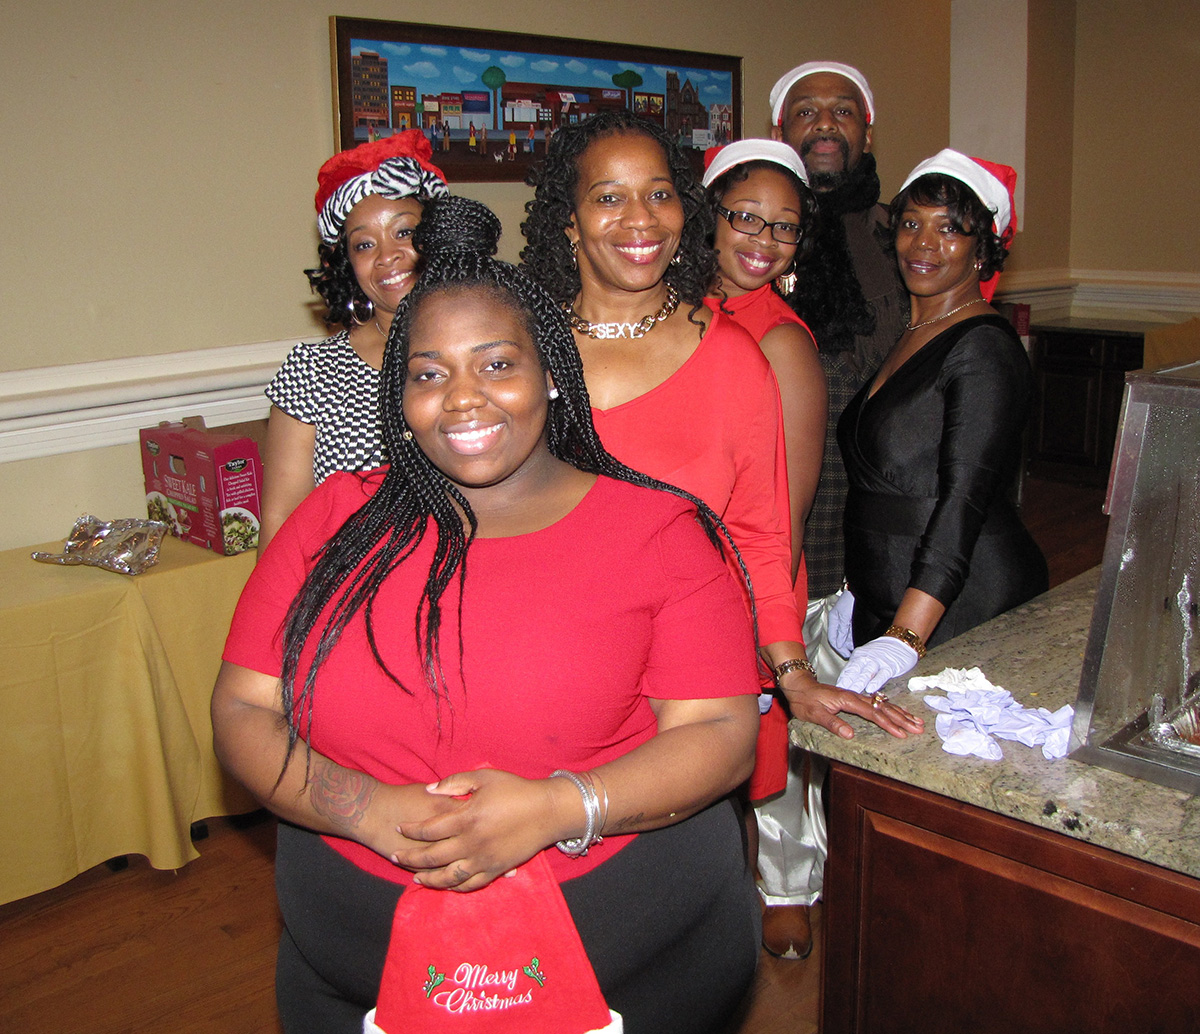 Fancy and out of uniform, members of the New Community Security Department dressed to impress for their holiday party.